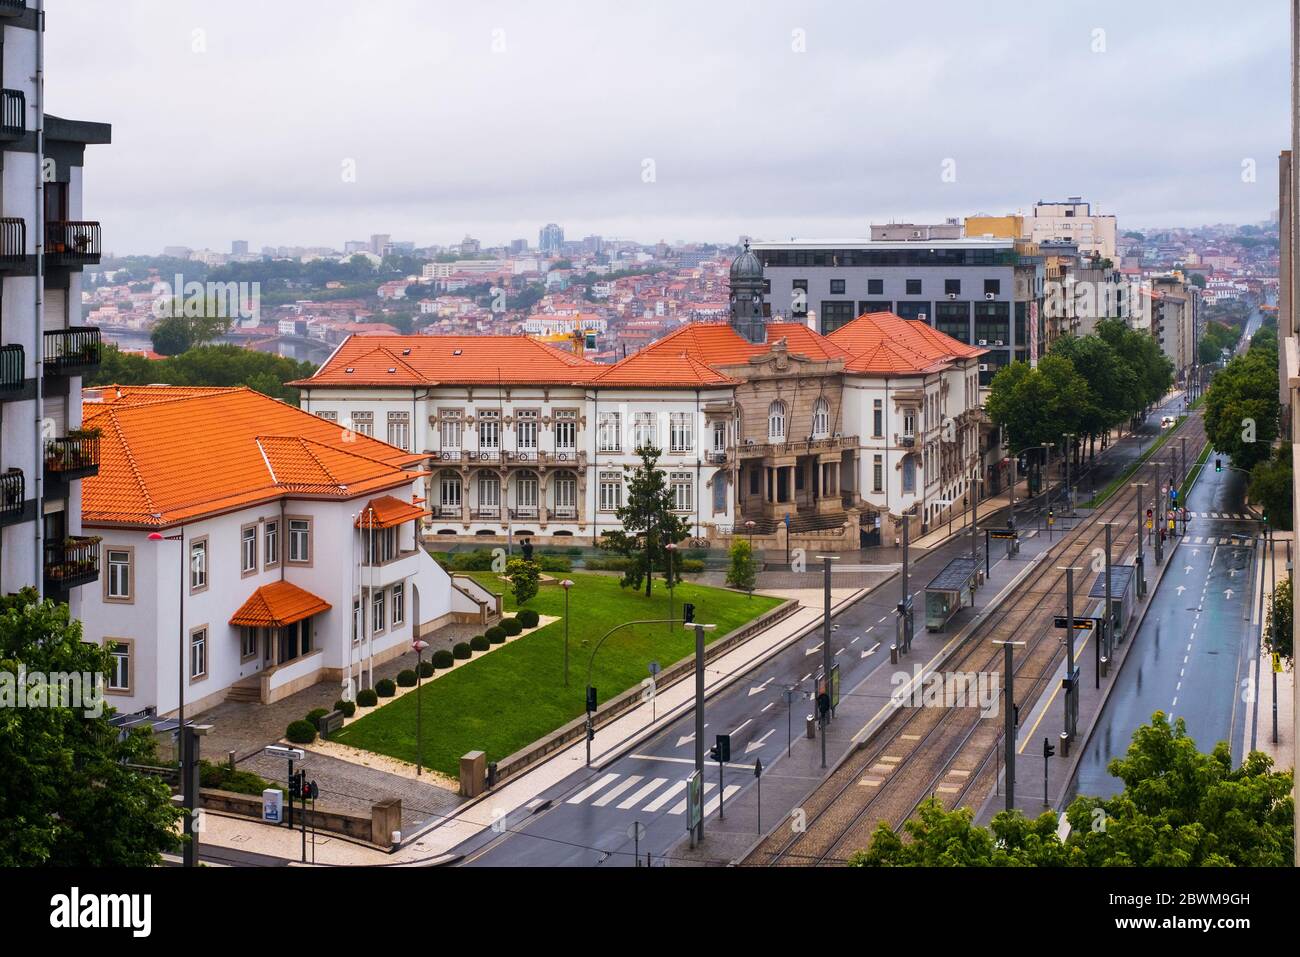 Gaia, Portugal. Aerial view of historical buildings in Gaia, Portugal in the morning. Porto city at the background Stock Photo